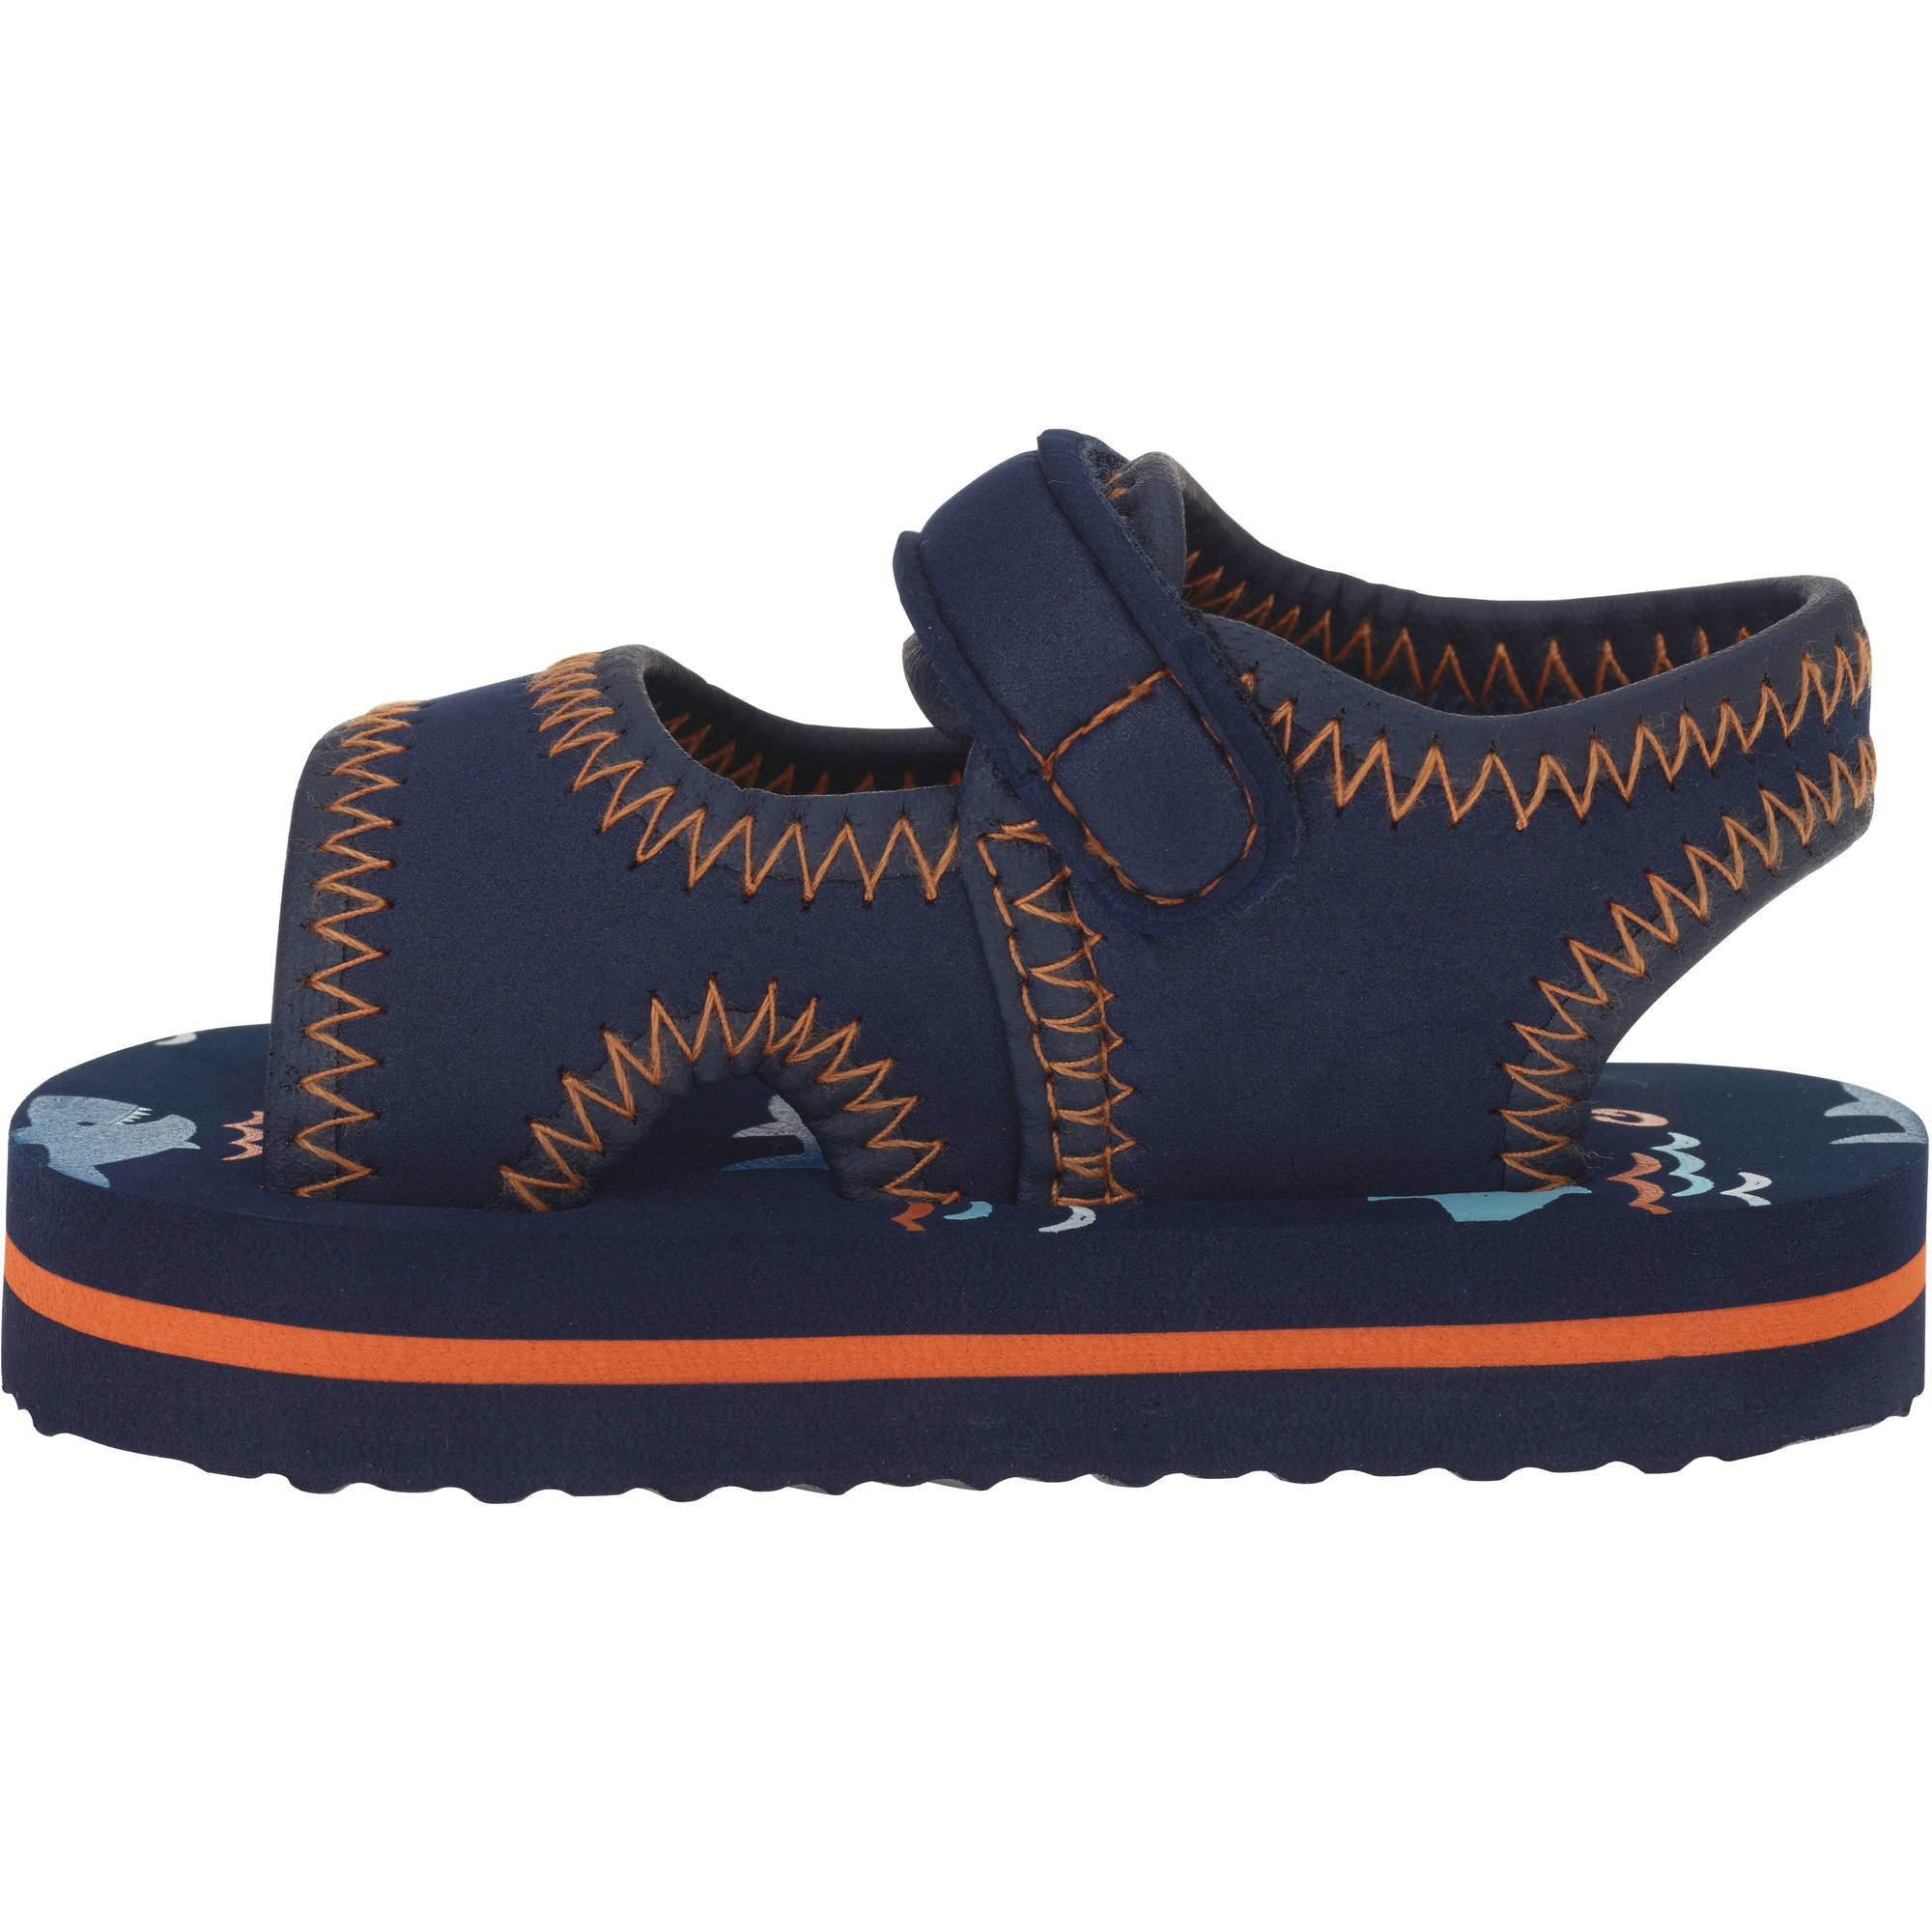 Garanamial Infant Girls' Bow Accent Sandal - image 2 of 5